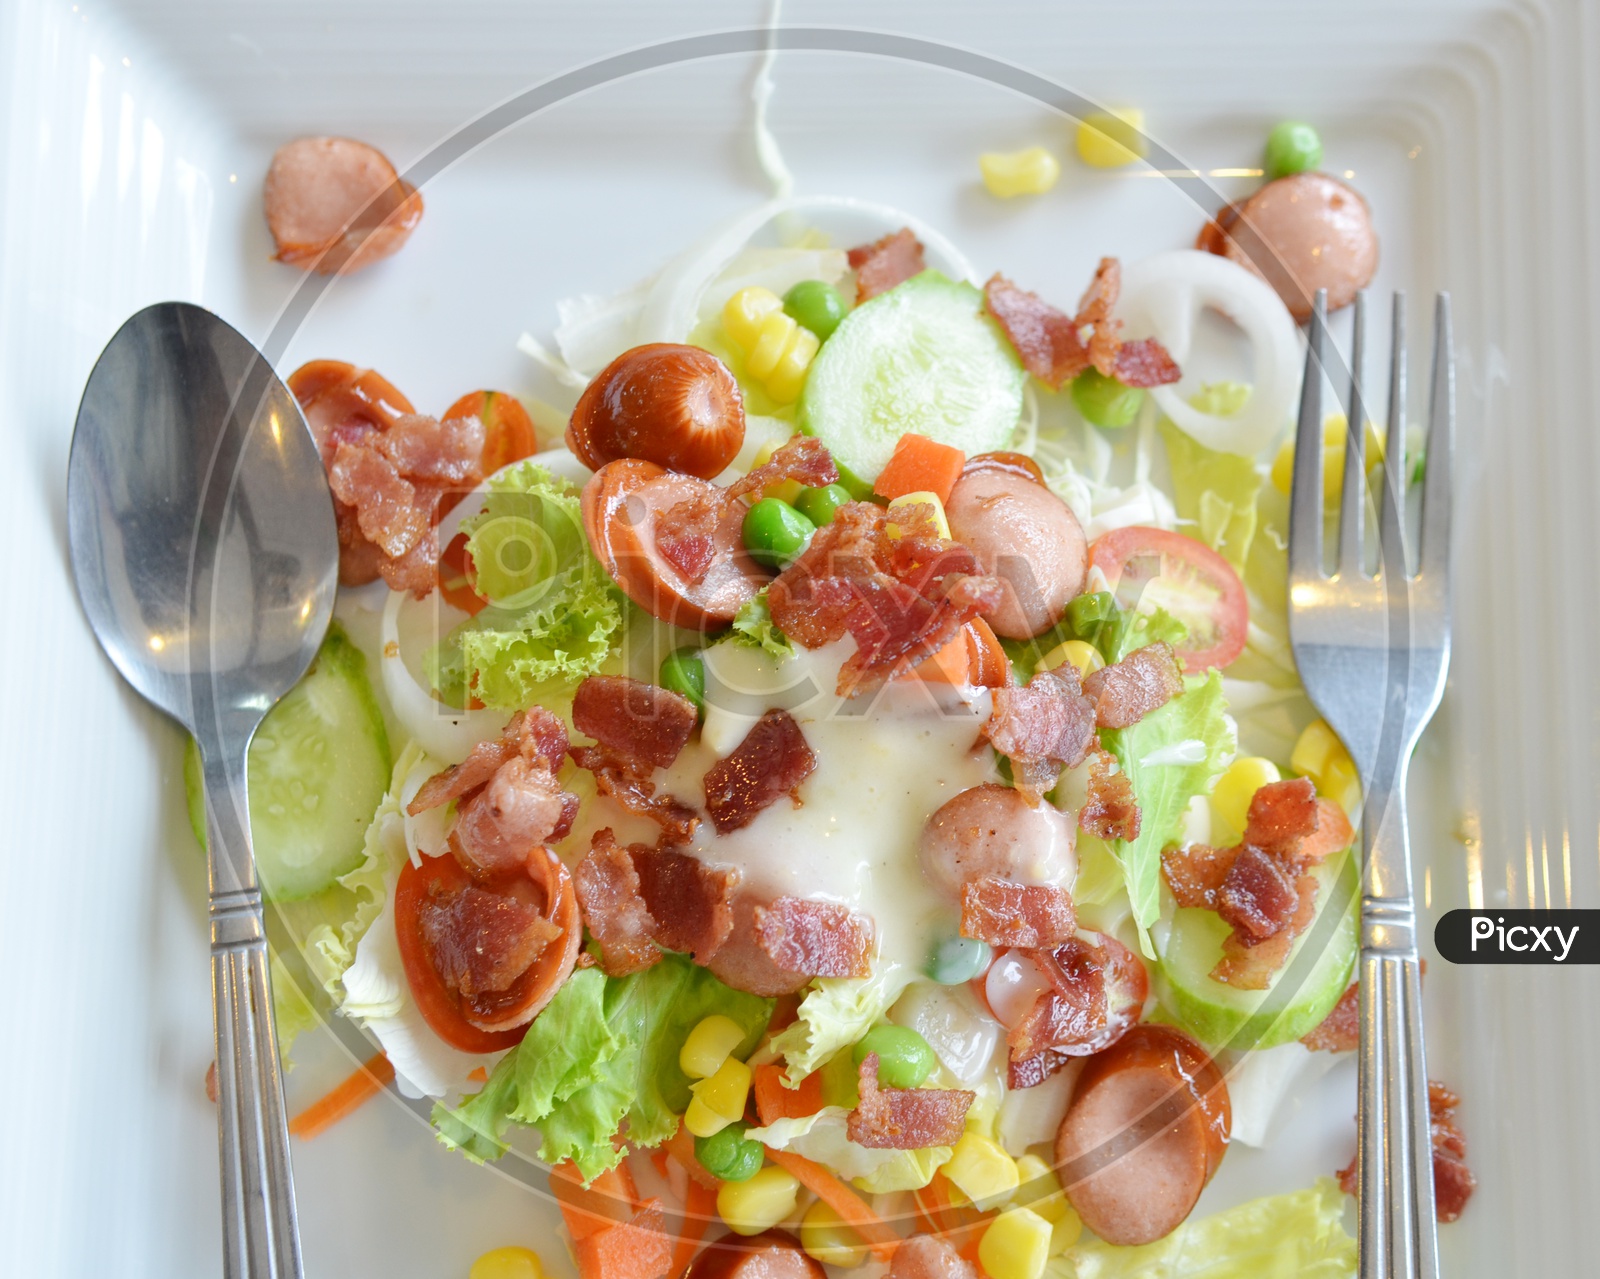 Fresh Salad With Beef Pieces Served in a Plate